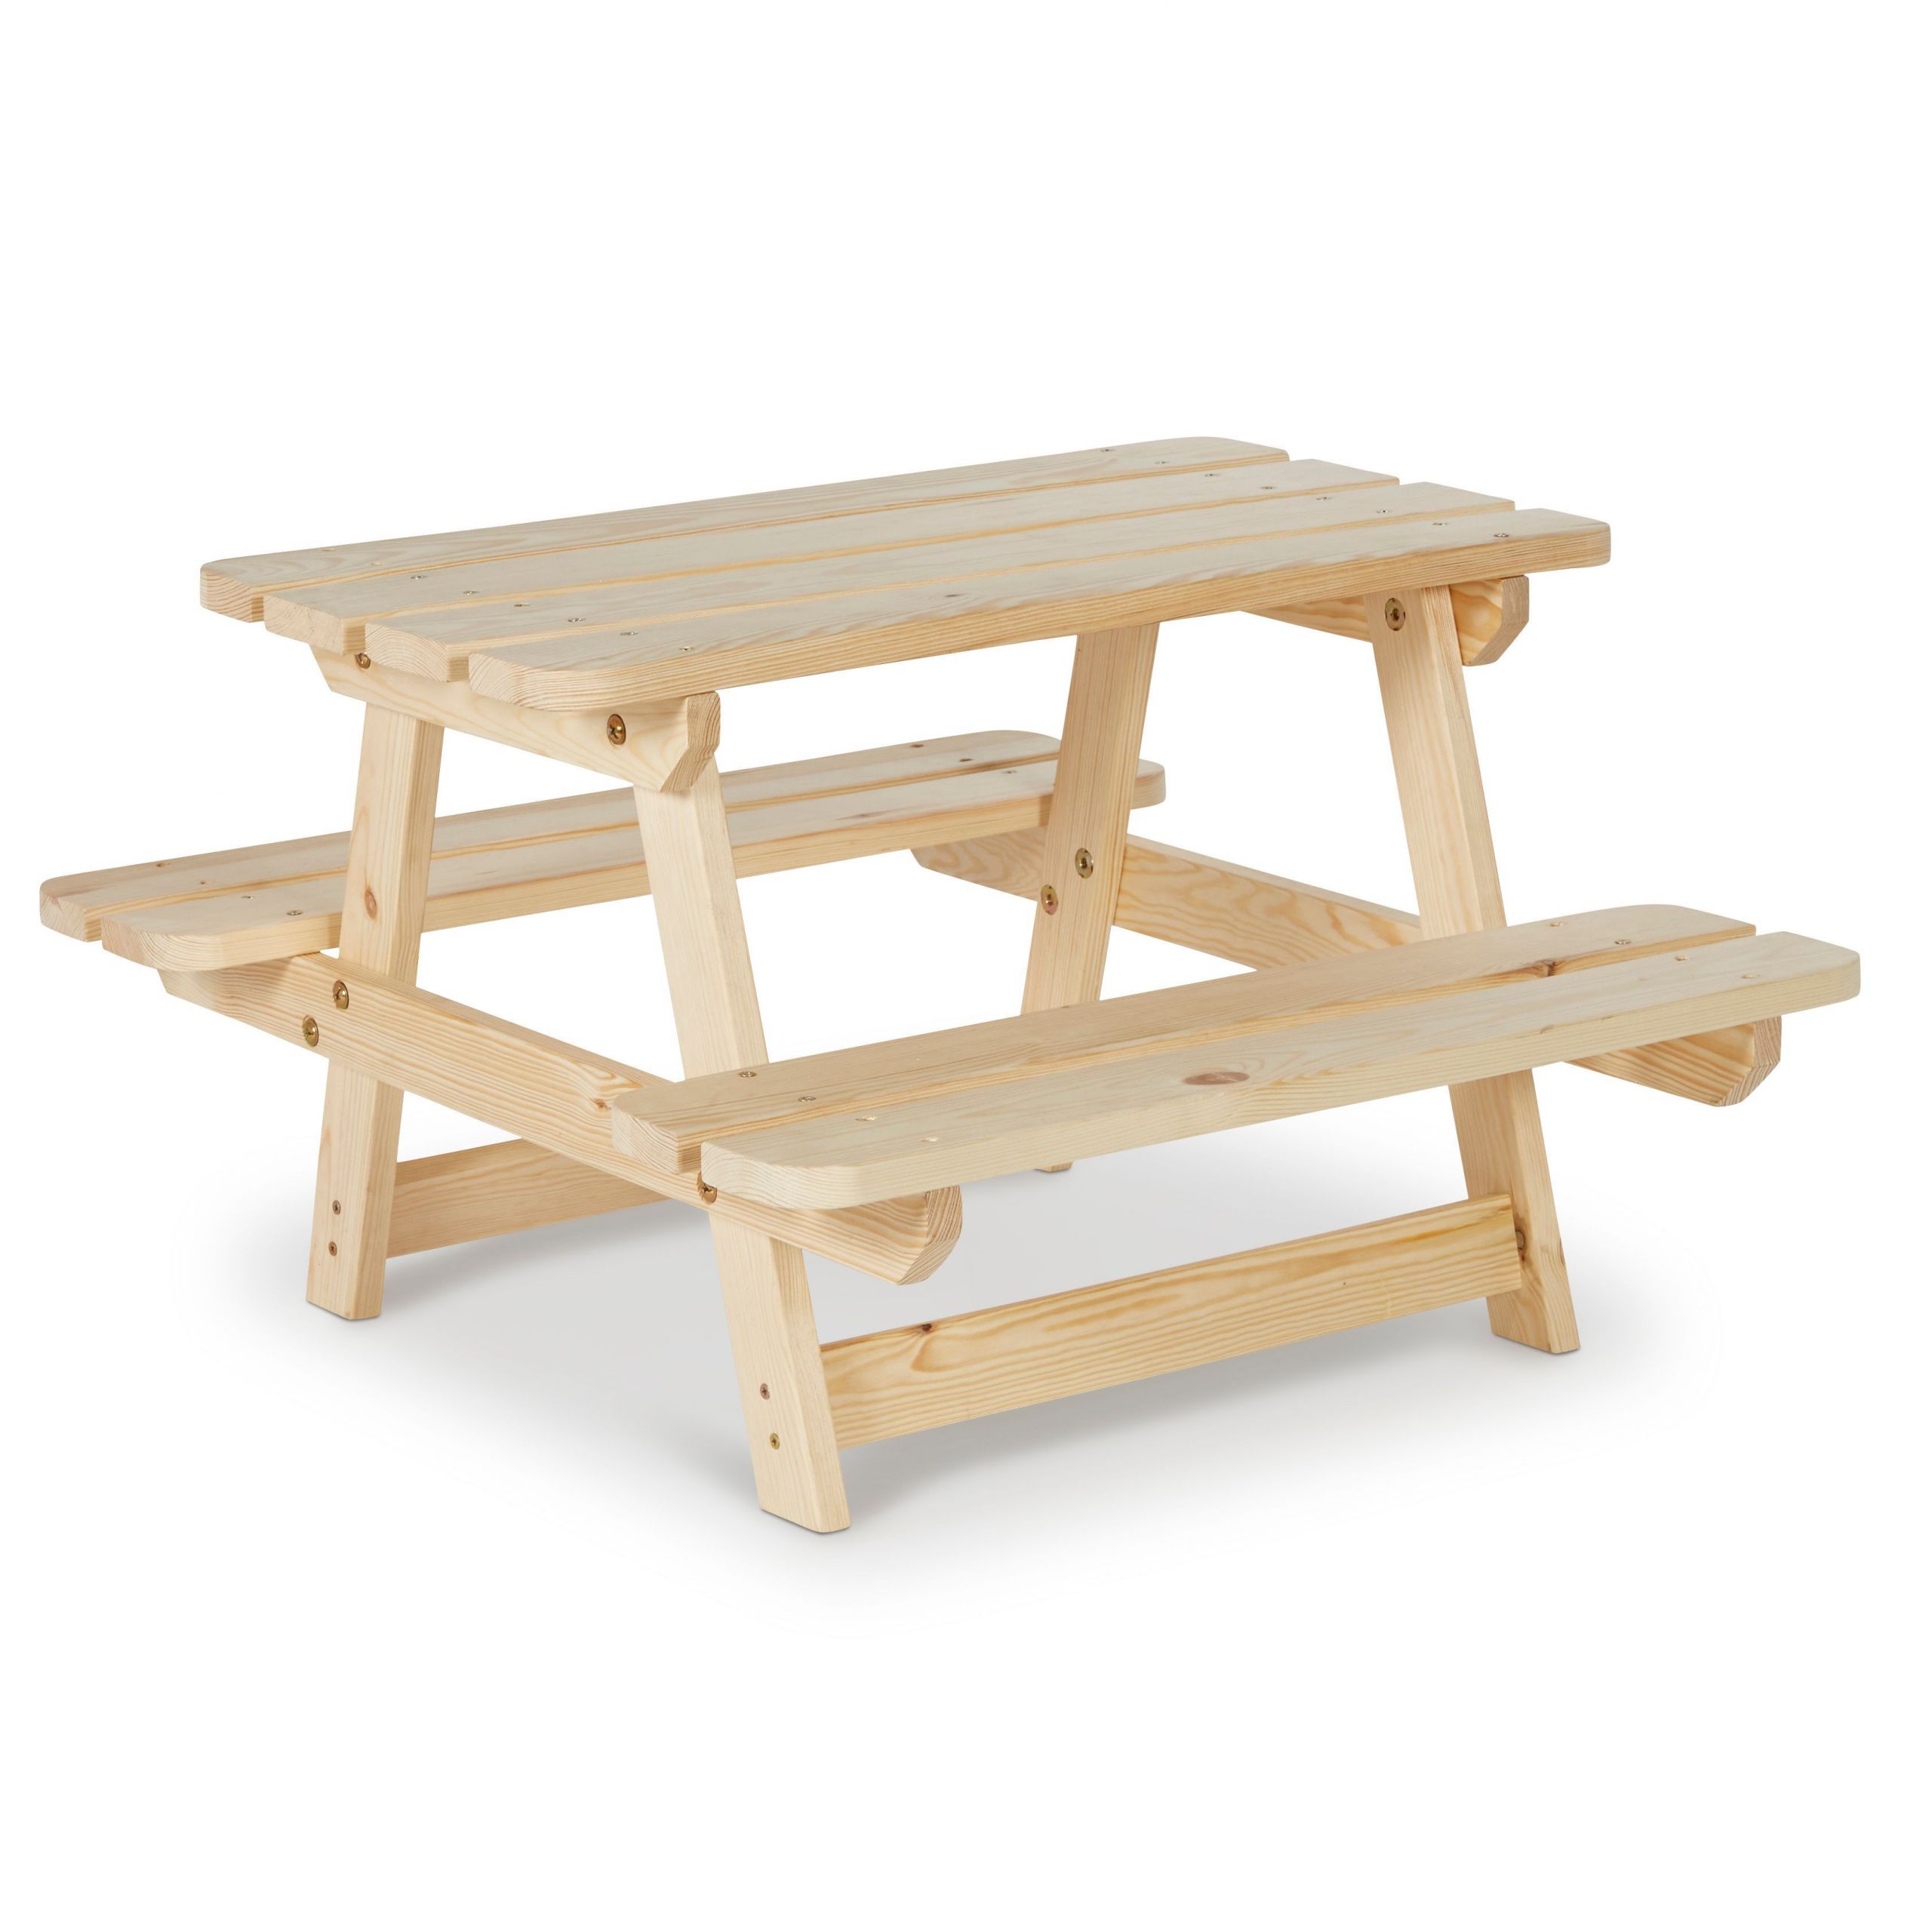 Kids Wooden Picnic Table
 Rockall Wooden Kid s Picnic Table Departments